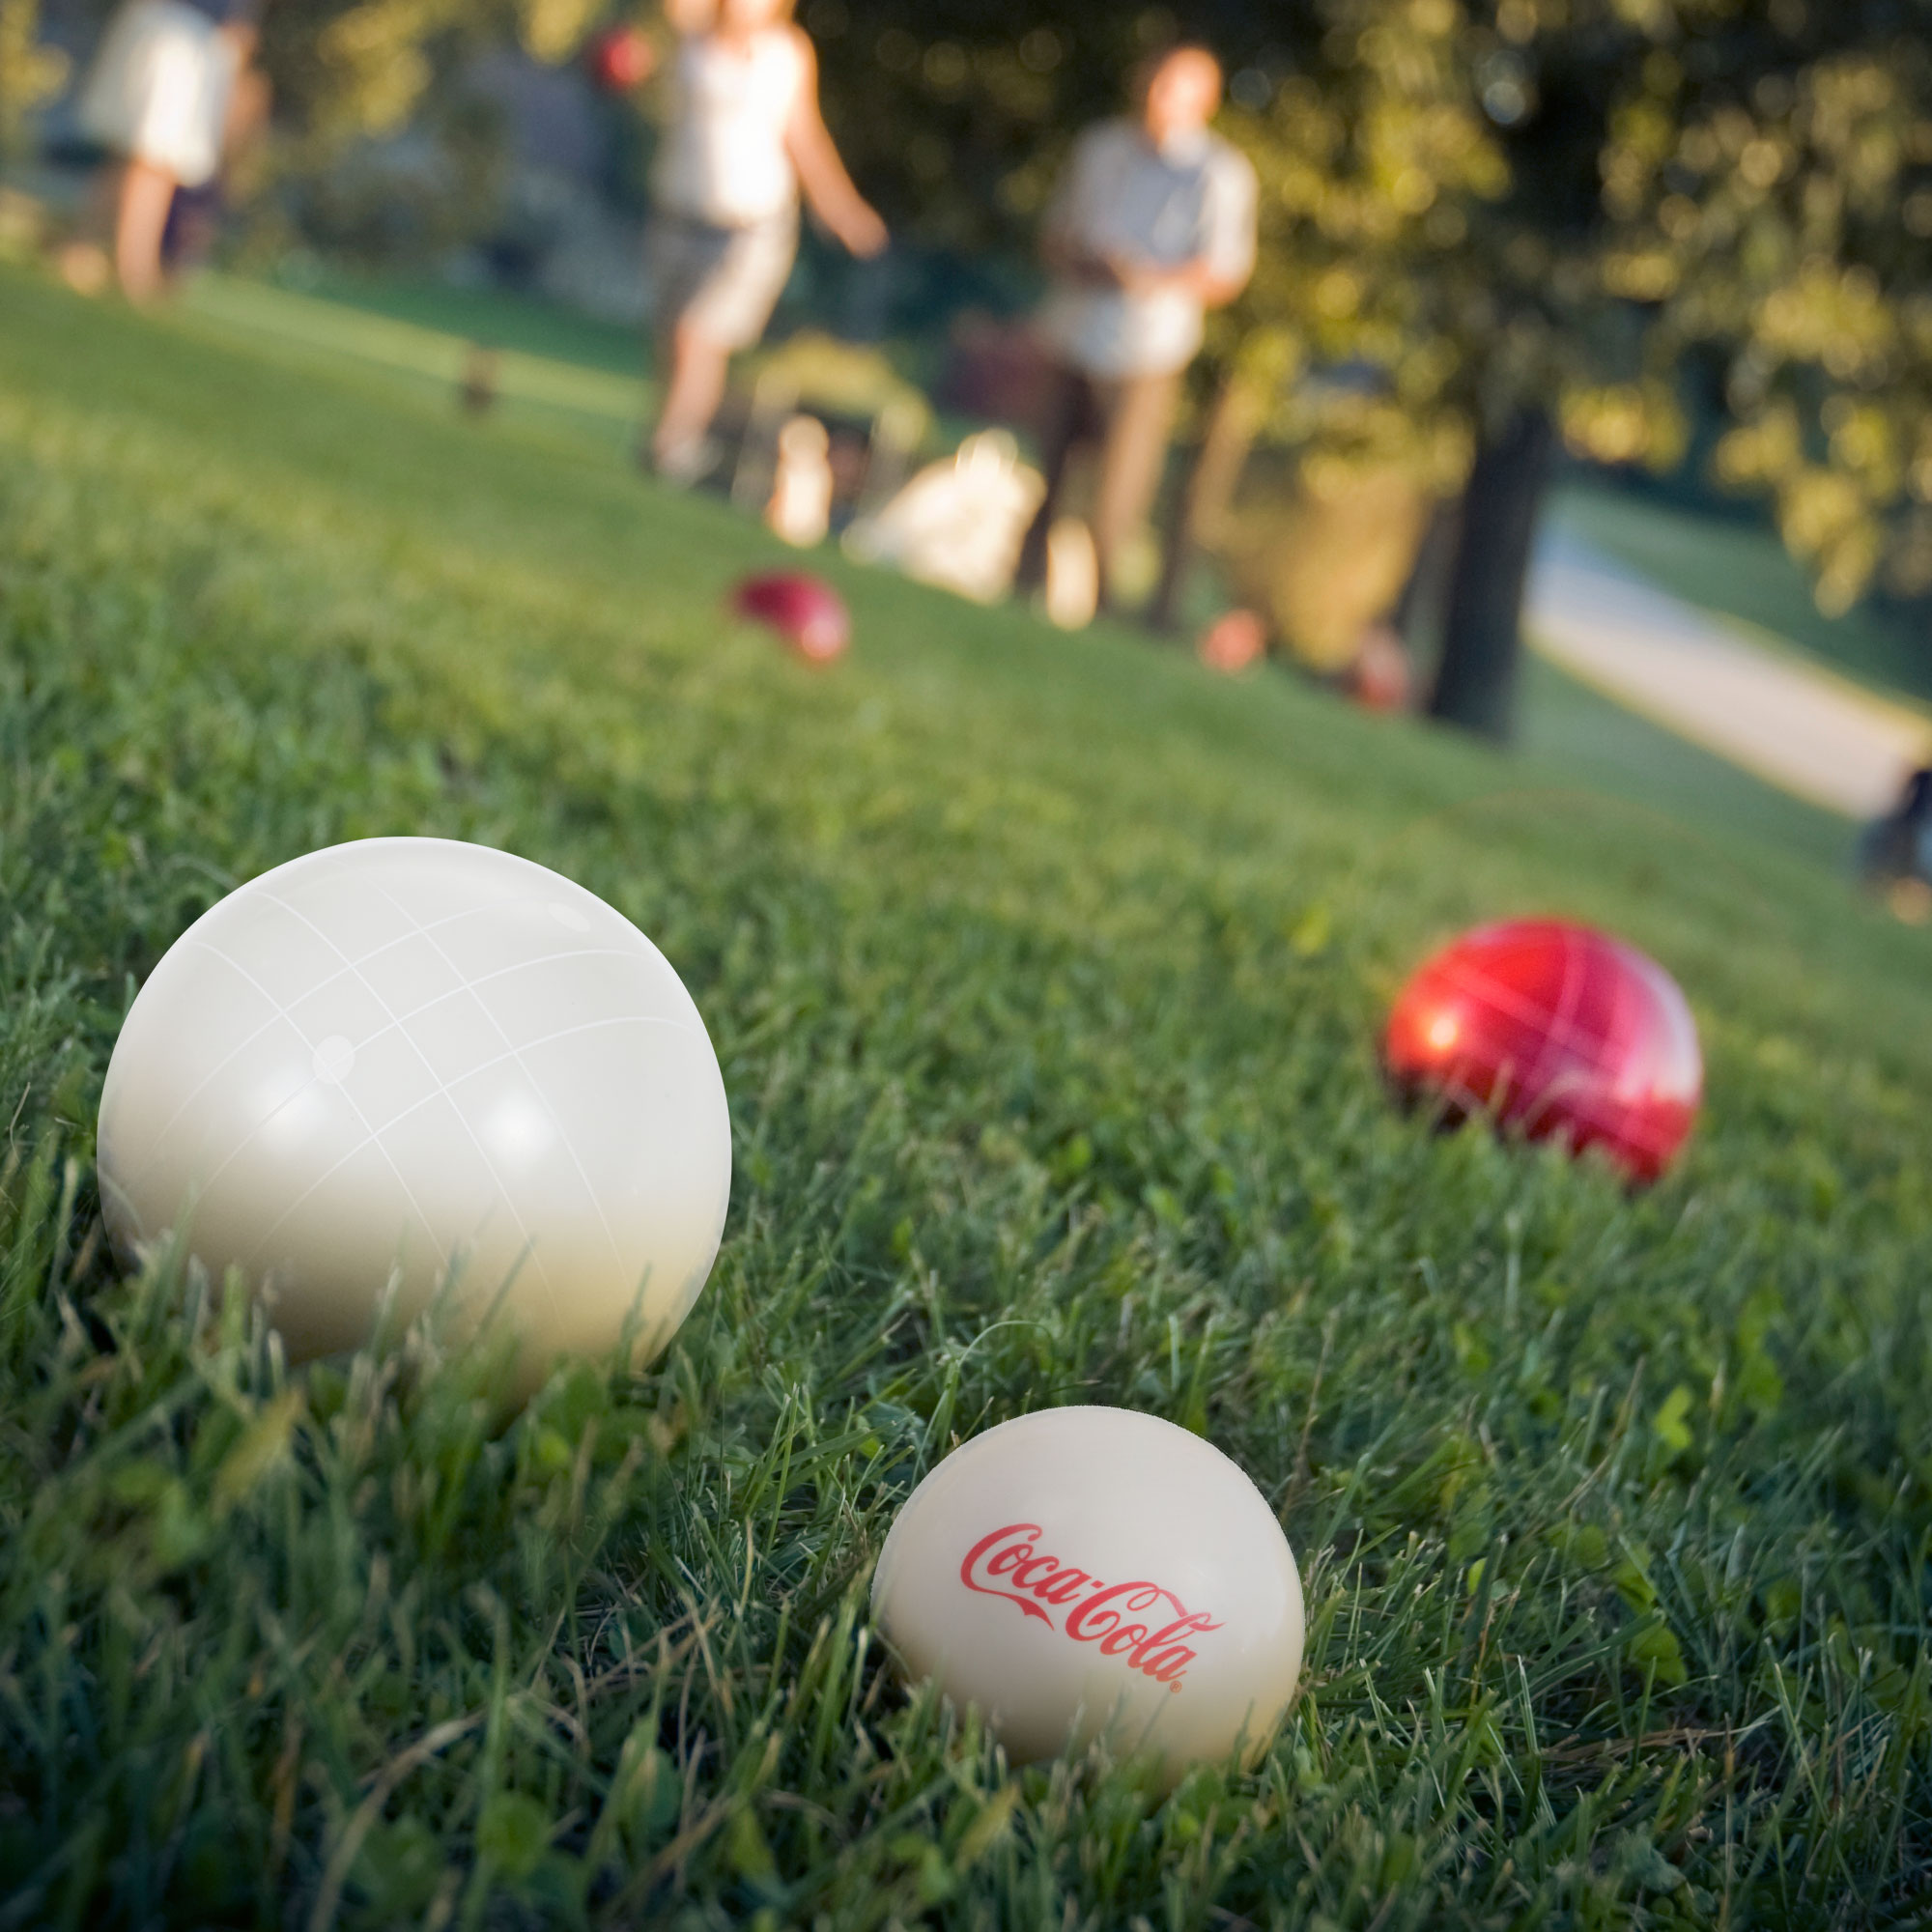 Bocce Ball Set- Regulation Outdoor Family Bocce Game by Hey! Play! (Coca Cola) - image 1 of 2